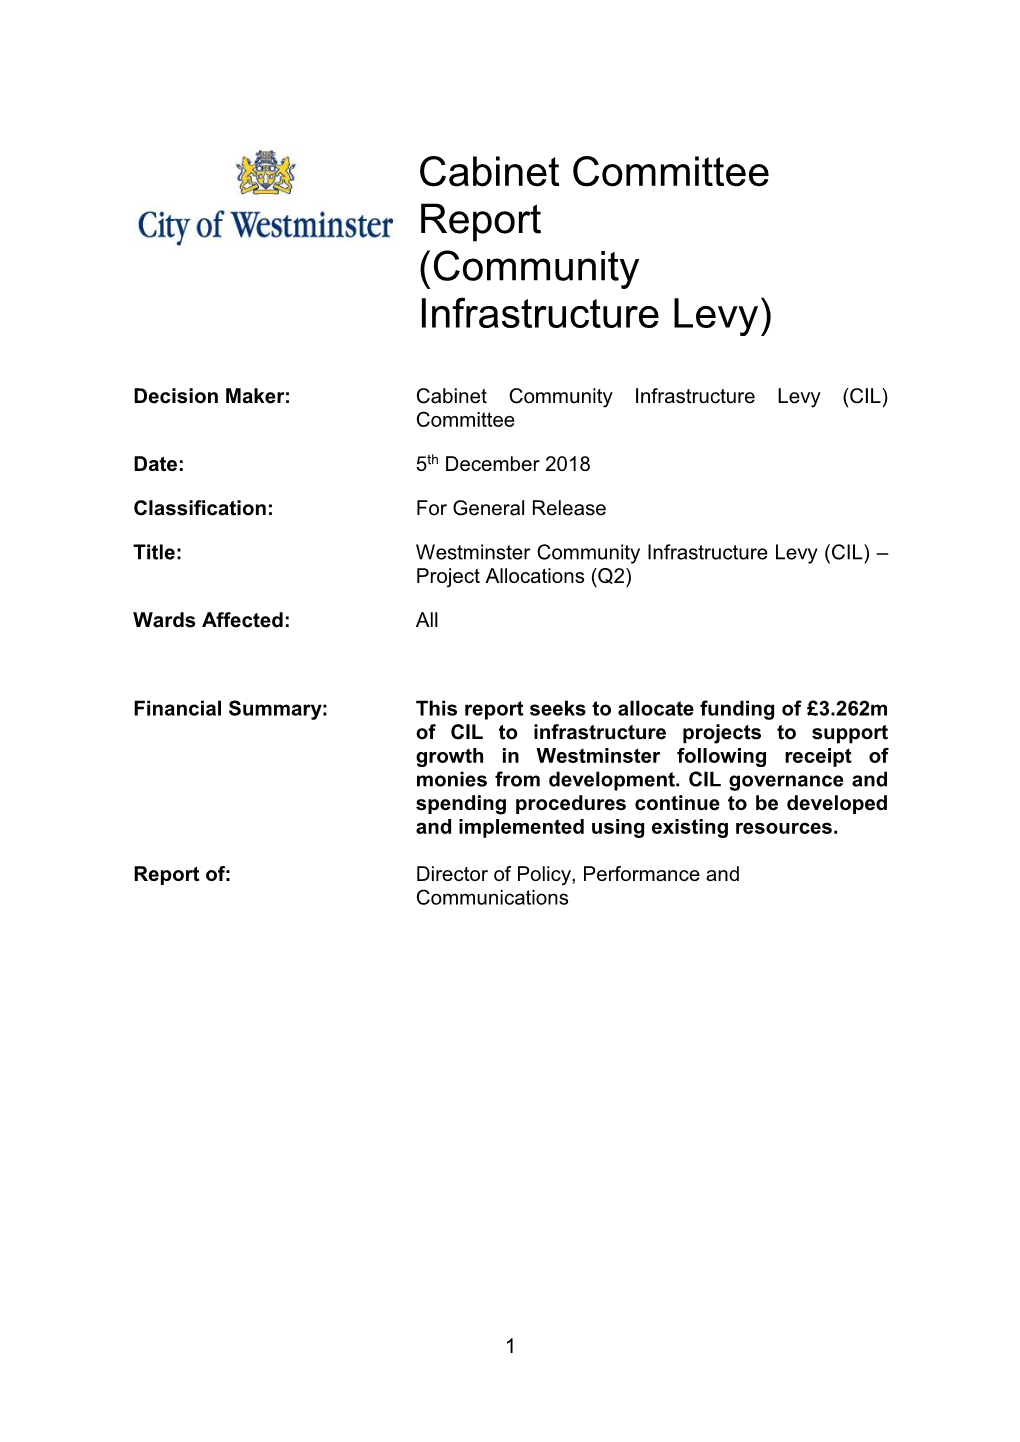 Cabinet Committee Report (Community Infrastructure Levy)